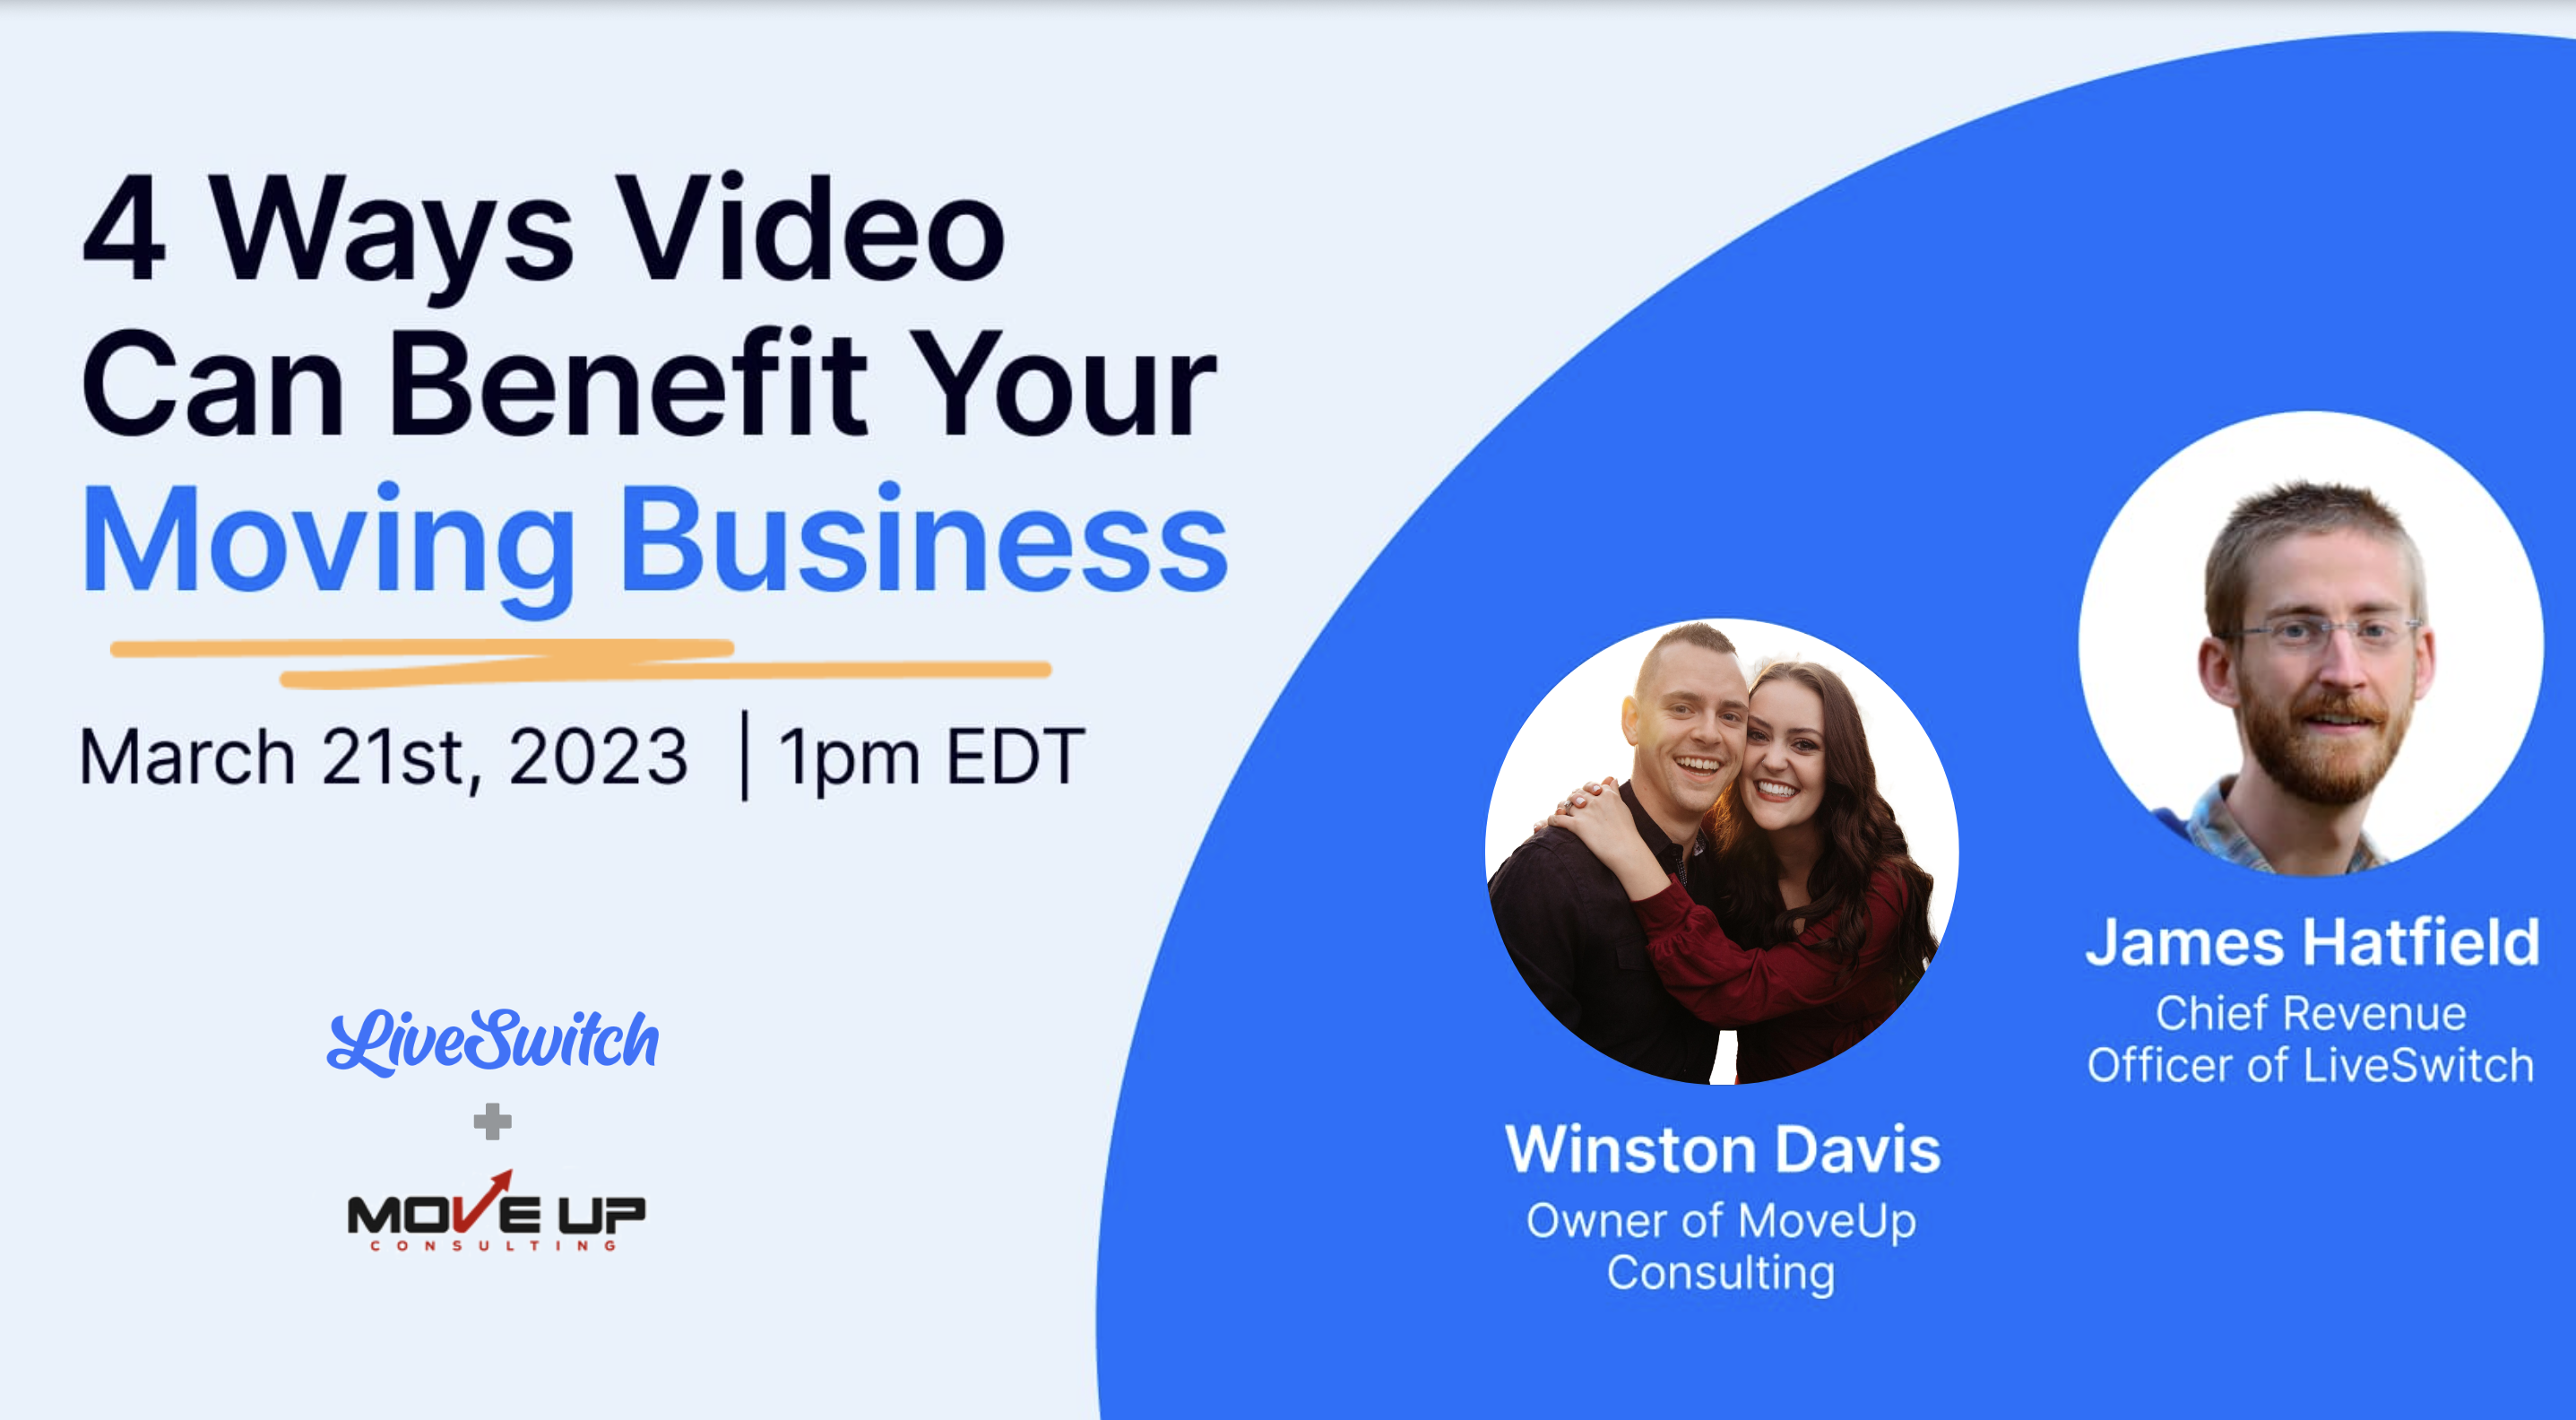 4 ways video can benefit your moving business webinar